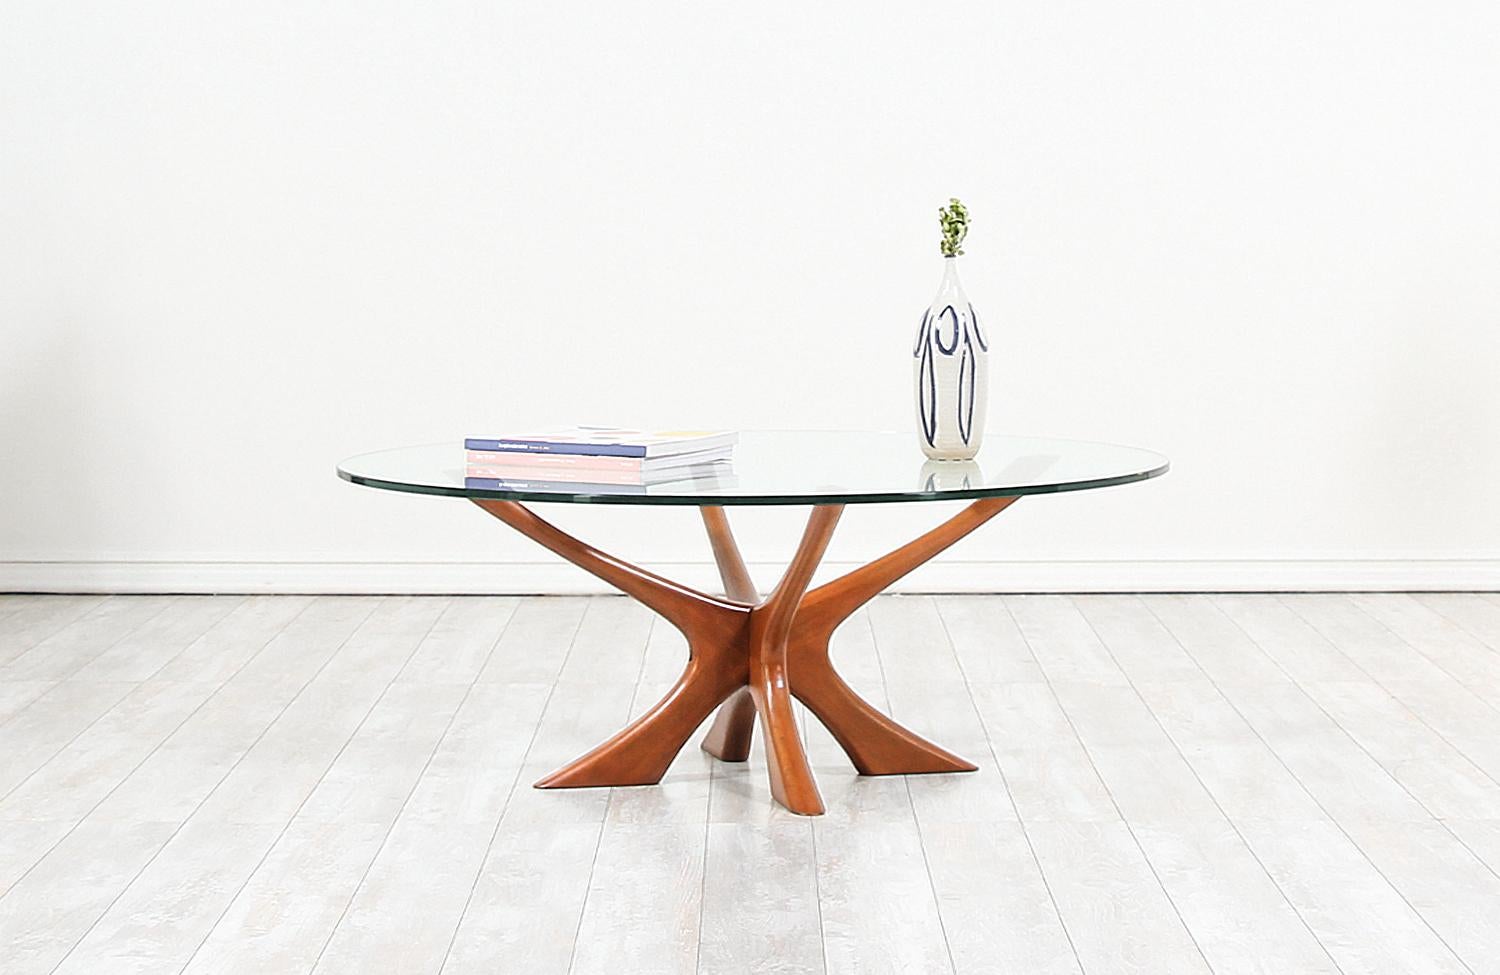 Stylish sculpted modern table designed by Illum Wikkelsø for CFC Silkeborg in Denmark circa 1950s. Also referred to as the JAX table this iconic design features a gracefully sculpted biomorphic teak base with a branch like structure that resembles